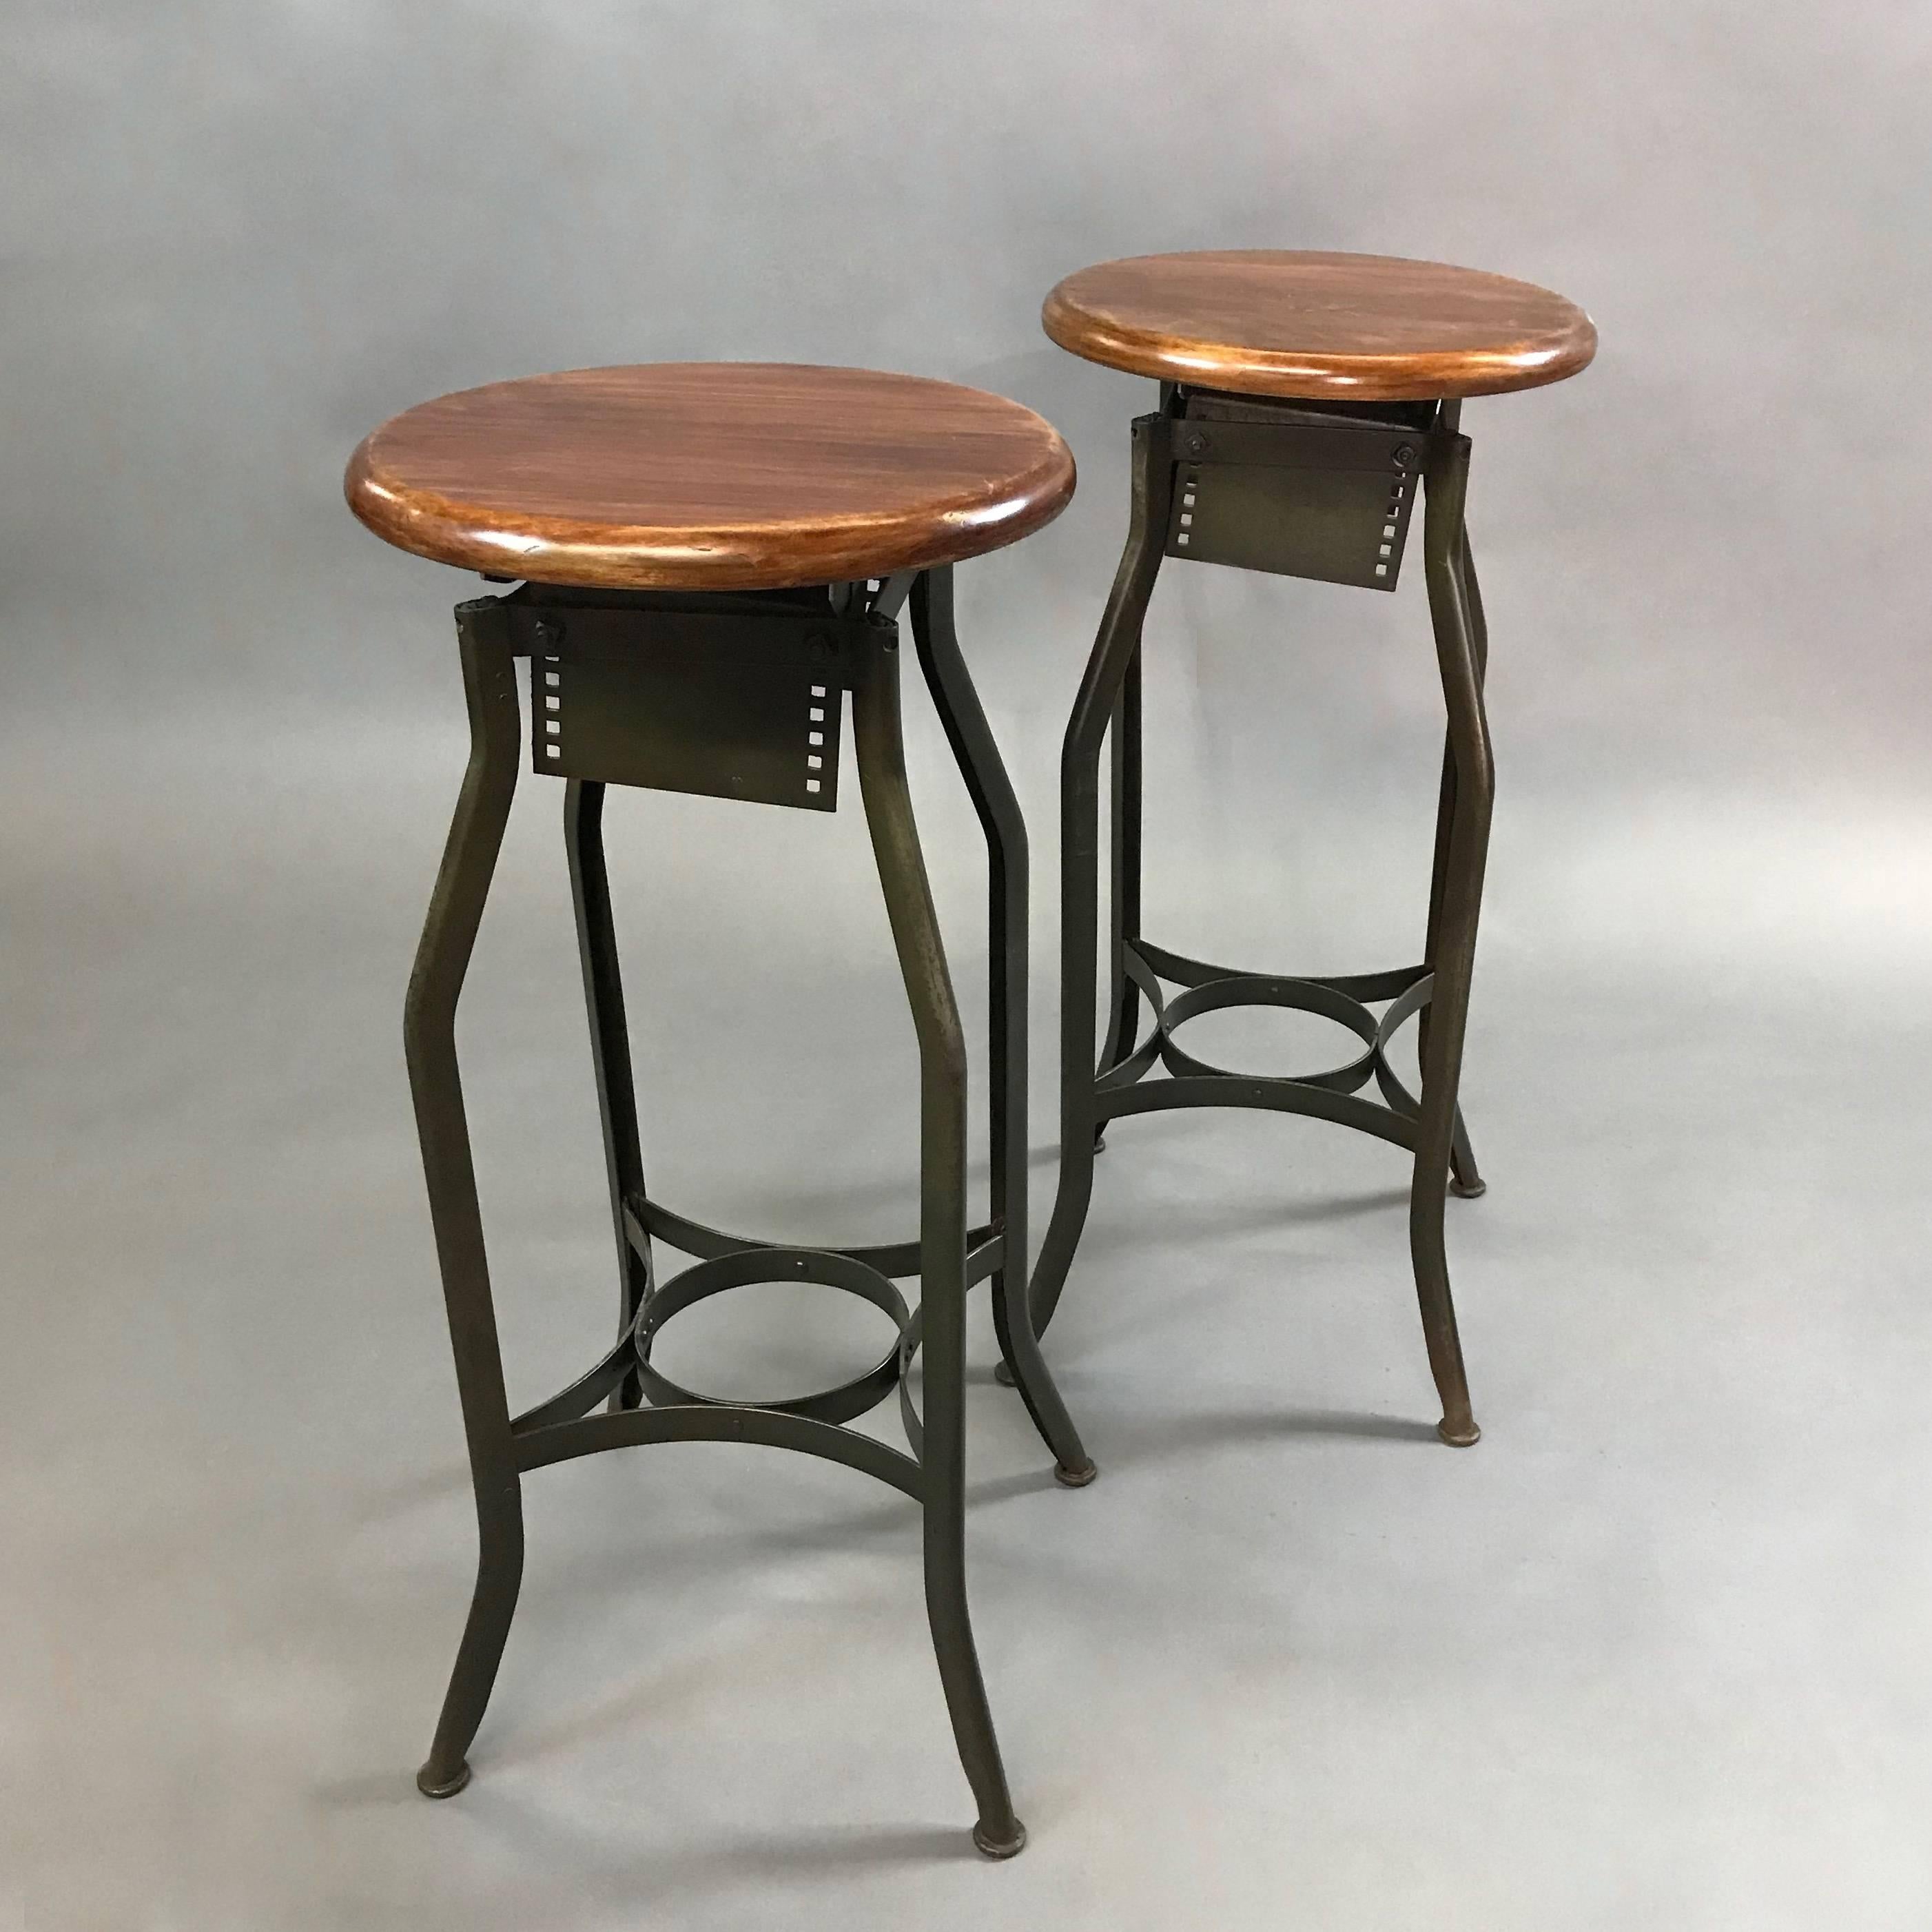 Pair of Industrial shop stool by Toledo Metal Furniture Co. feature stained pine seats and painted steel frames. The seat diameter is 14 inches and the foot print is 20 inches. The stools are height adjustable from 30 - 34 inches by unscrewing the